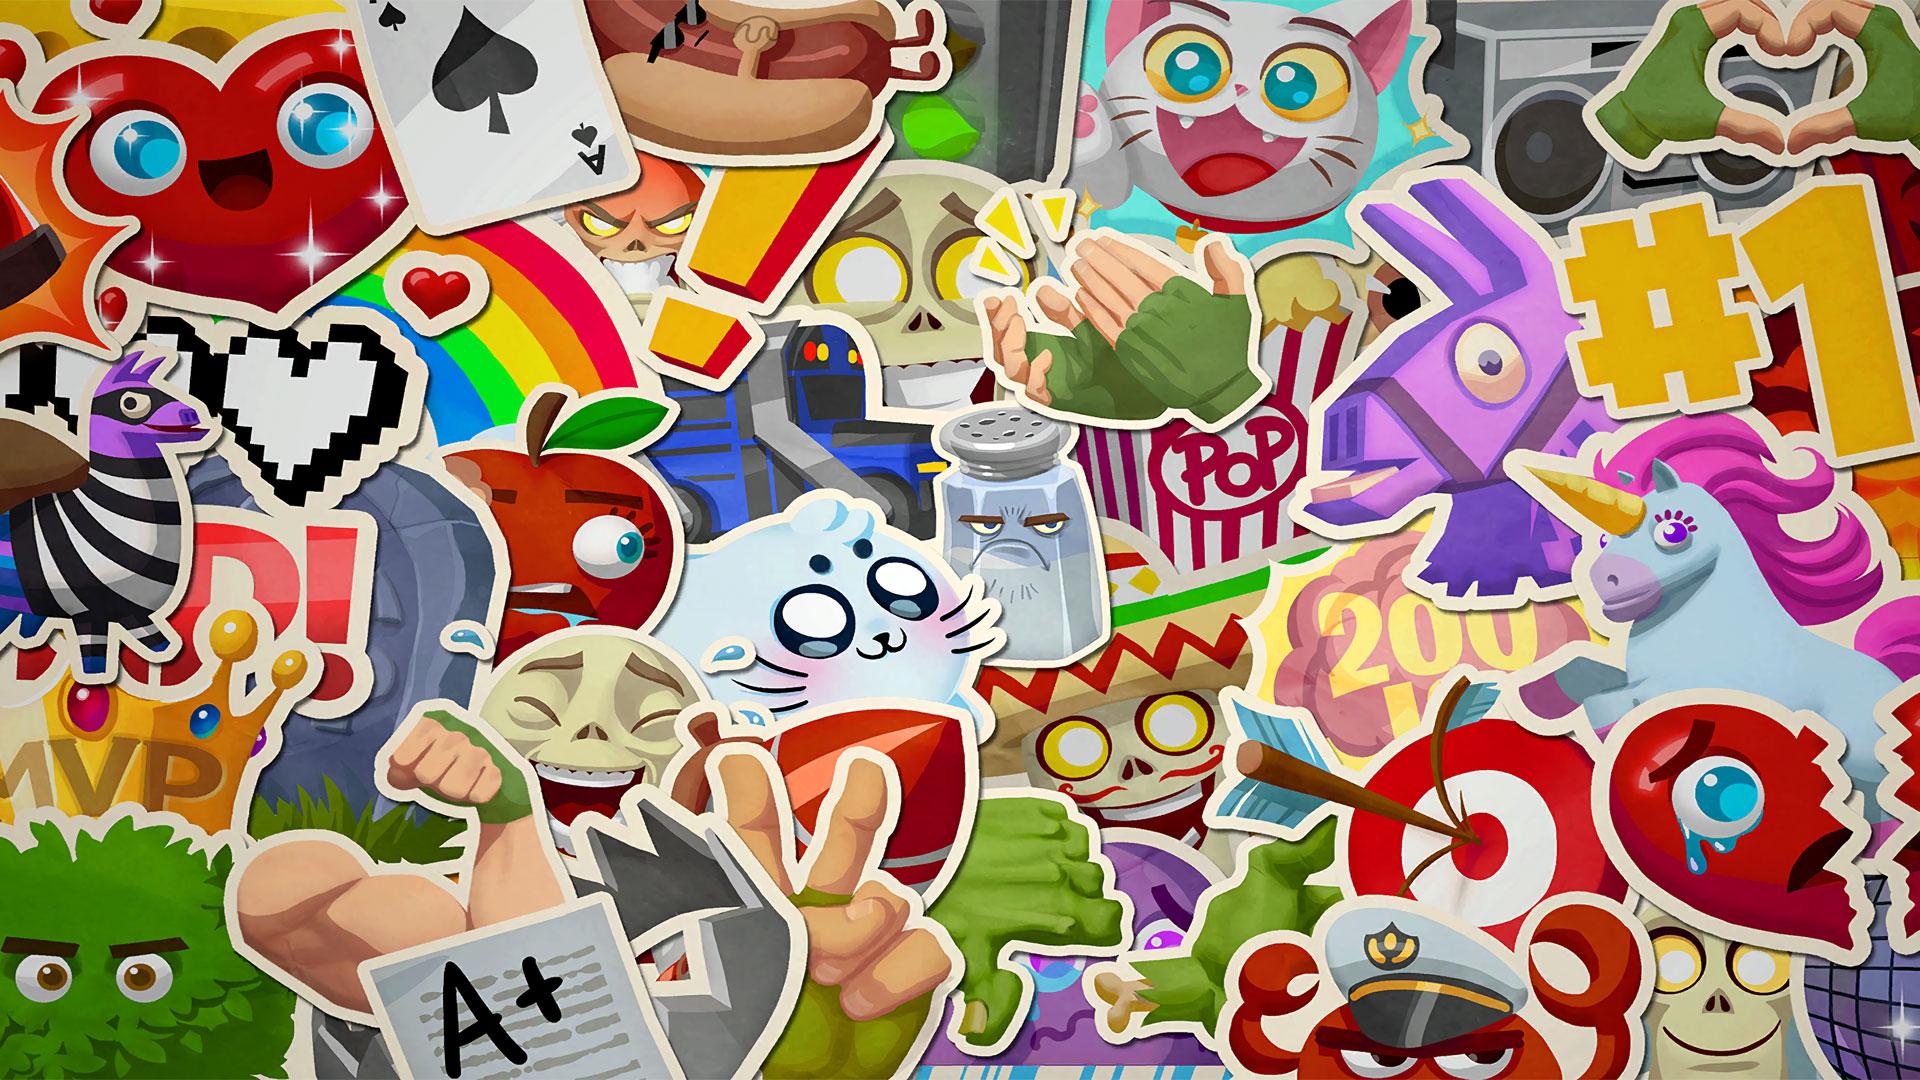 Fortnite Emoticons! Loading Screen Game Guides